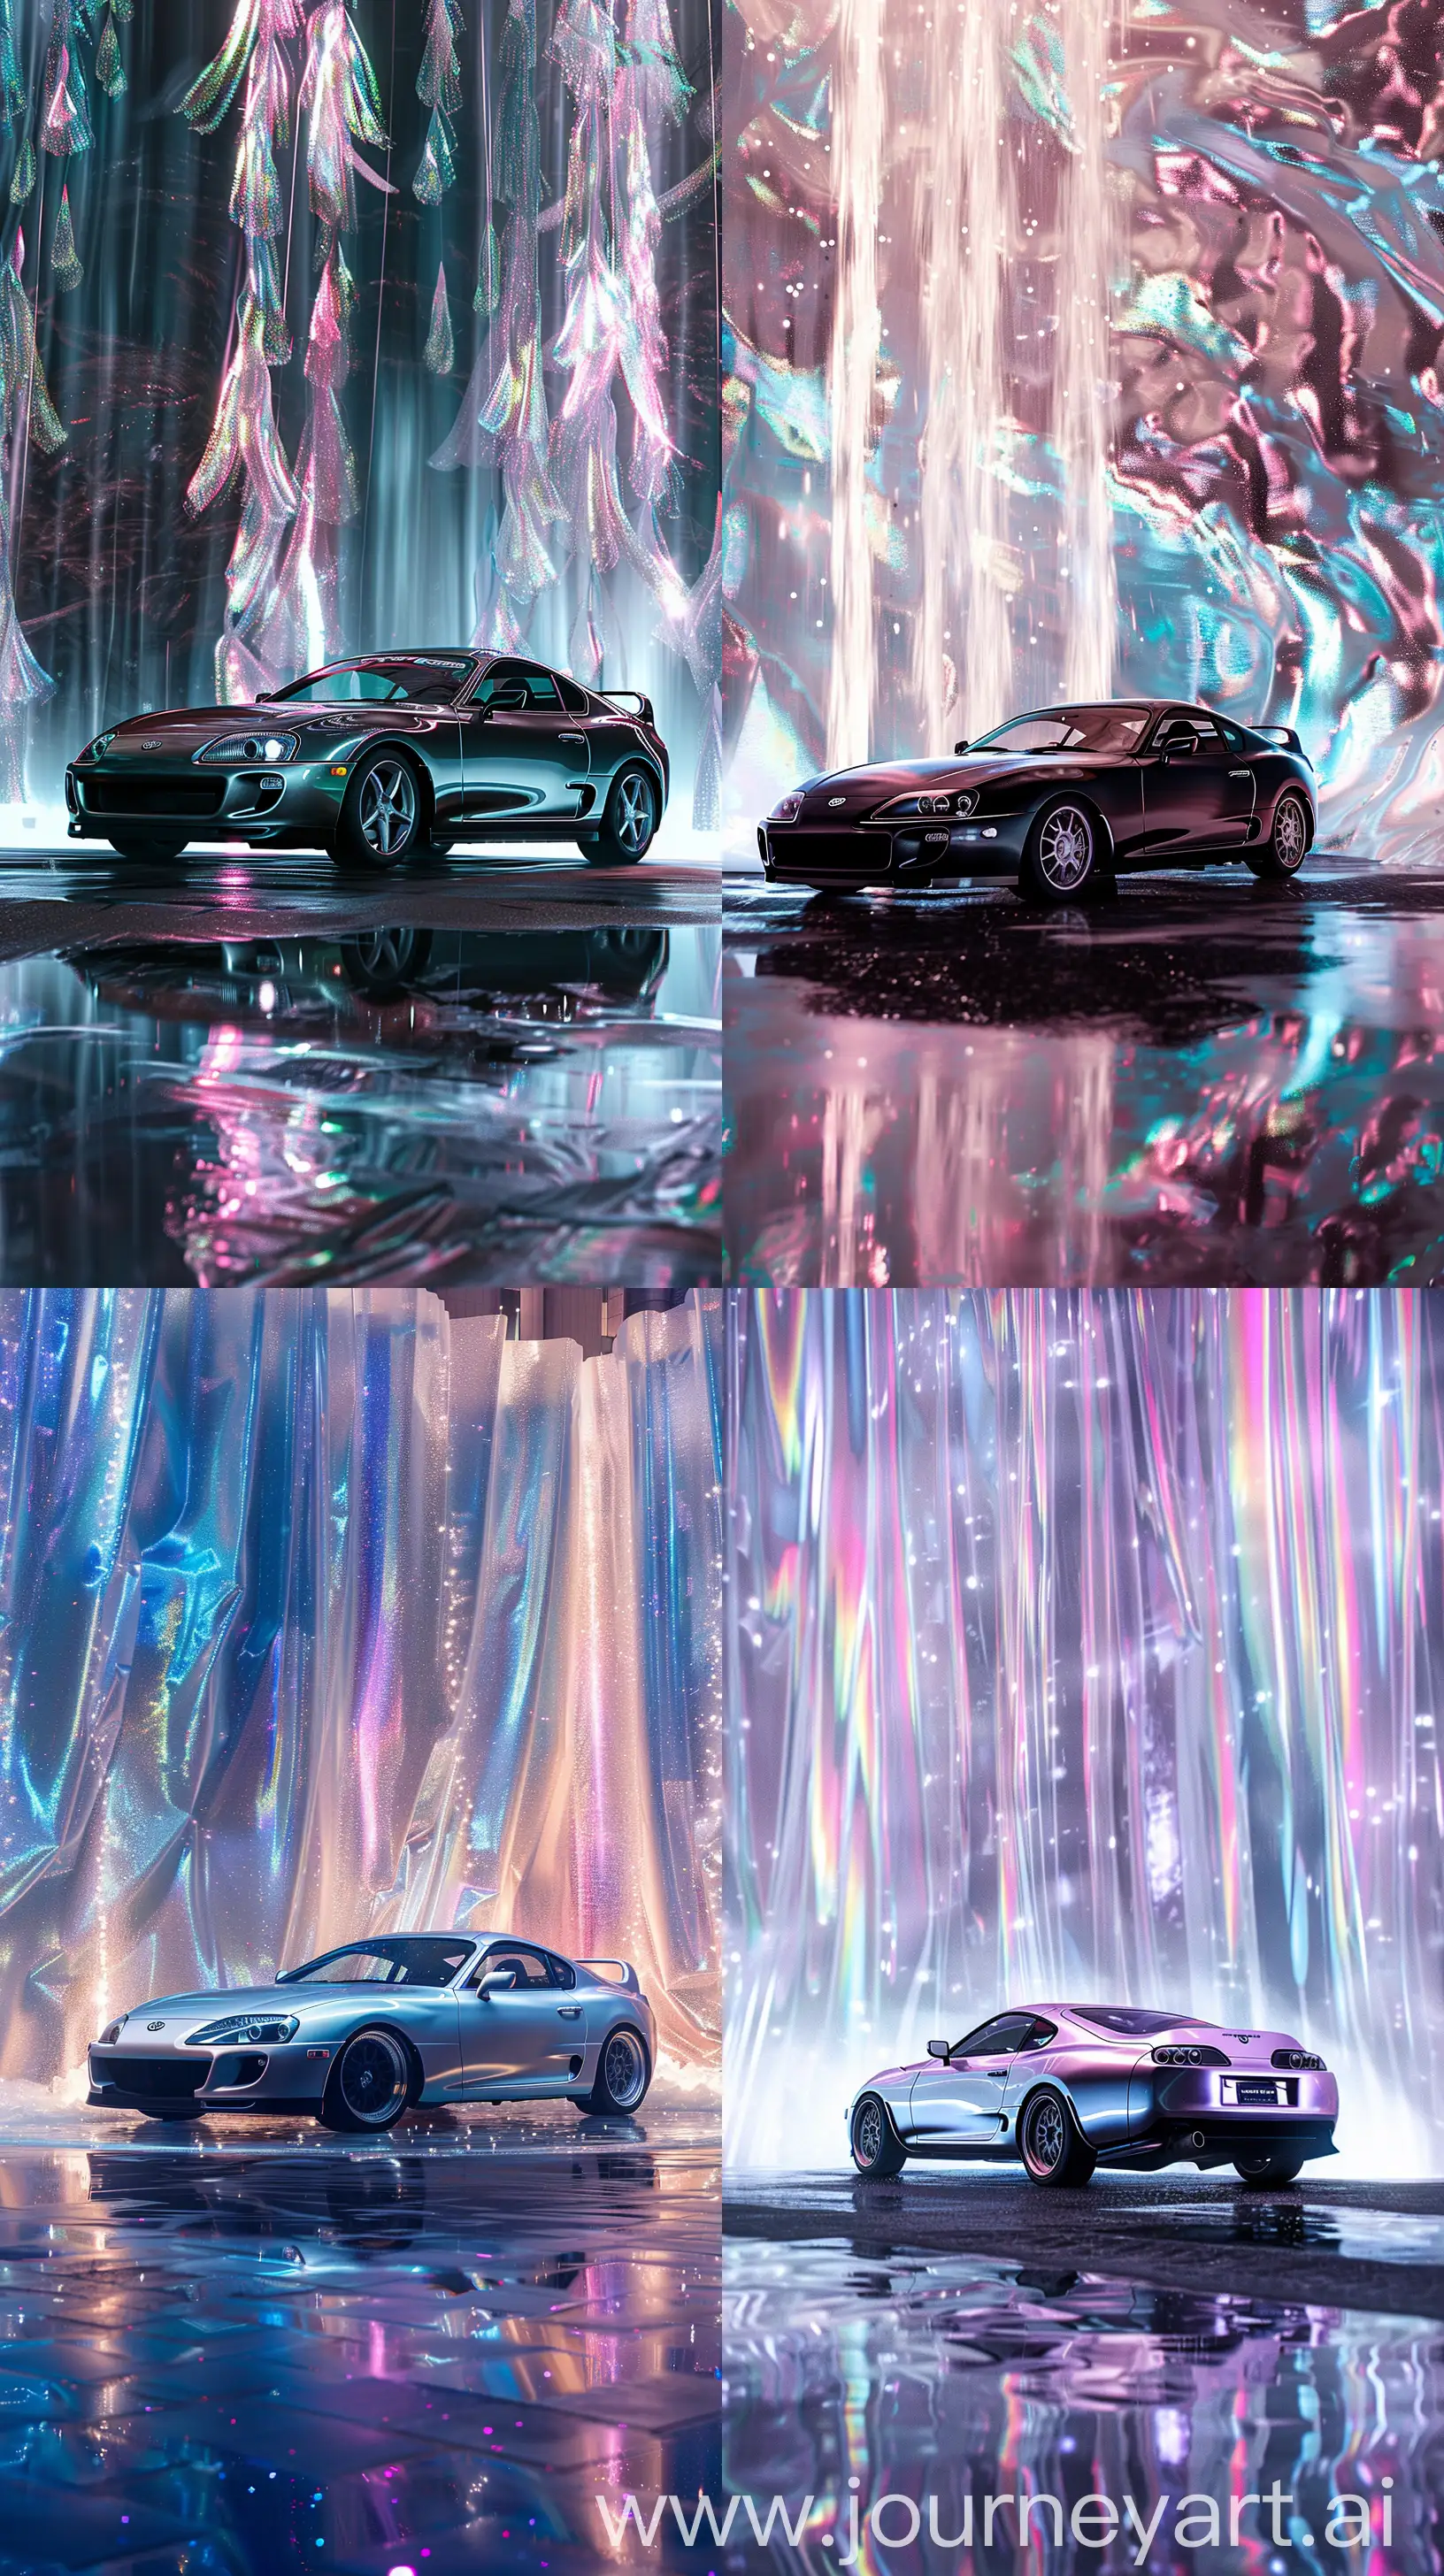 Ethereal Whisper, a quiet mk4 Supra surrounded by a waterfall of silky iridescent feathers, creating a dreamlike aura that blurs the lines between reality and fiction. --ar 9:16 --style raw 